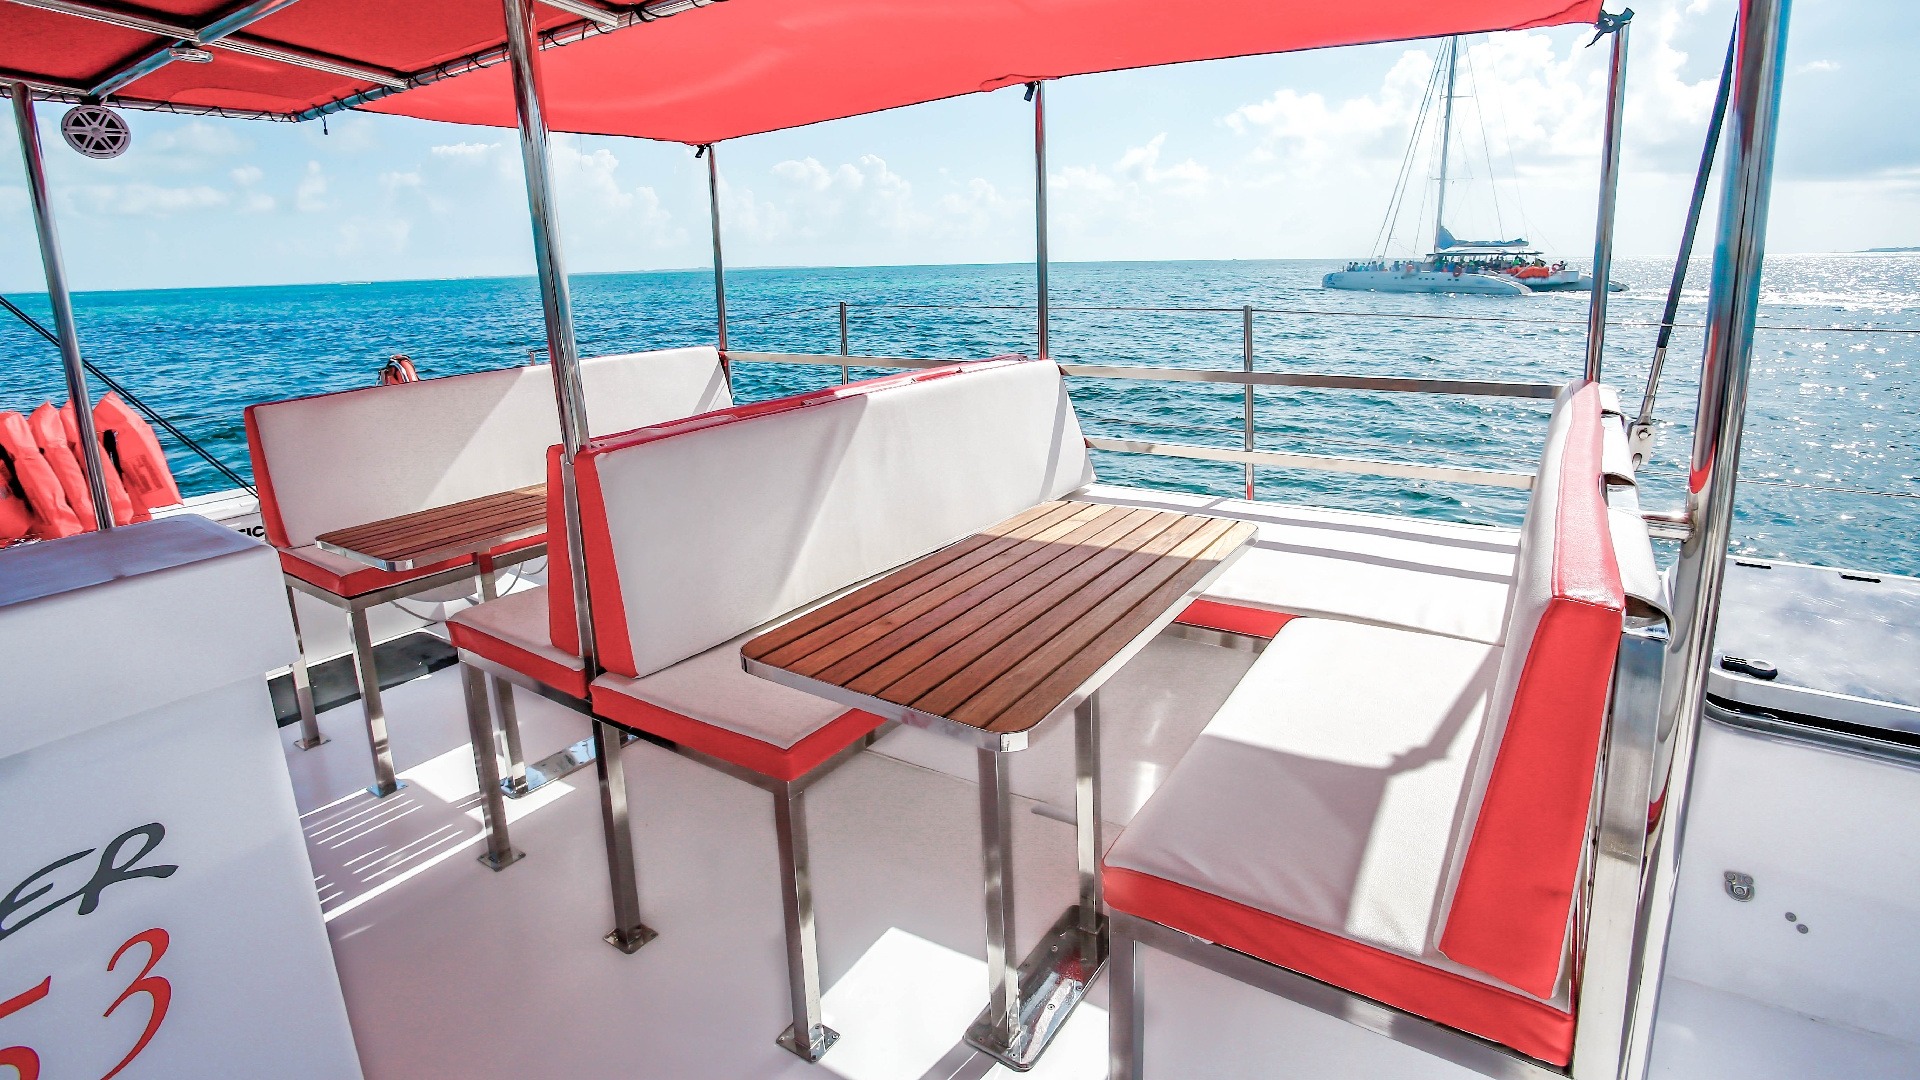 7 - LowRes - Charters Caribbean Dreams